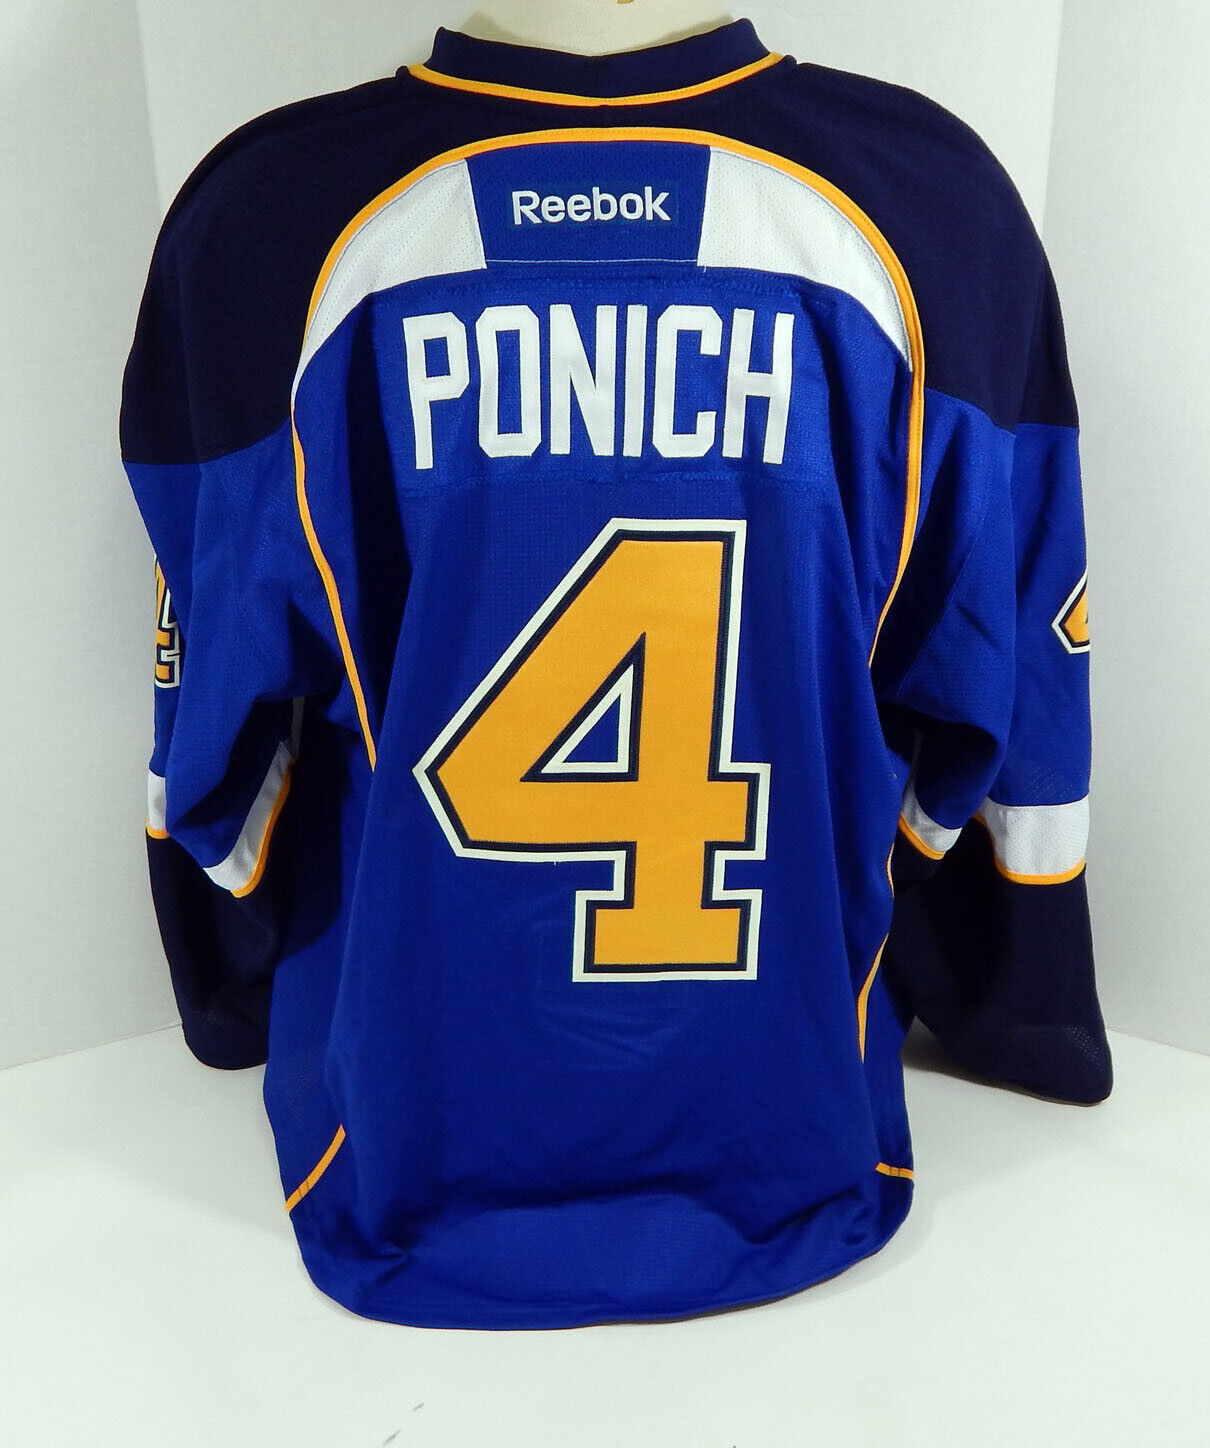 2012-13 Peoria Rivermen Manufacturer direct delivery St. Louis Blues Branded goods Brett Game Ponich Iss #4